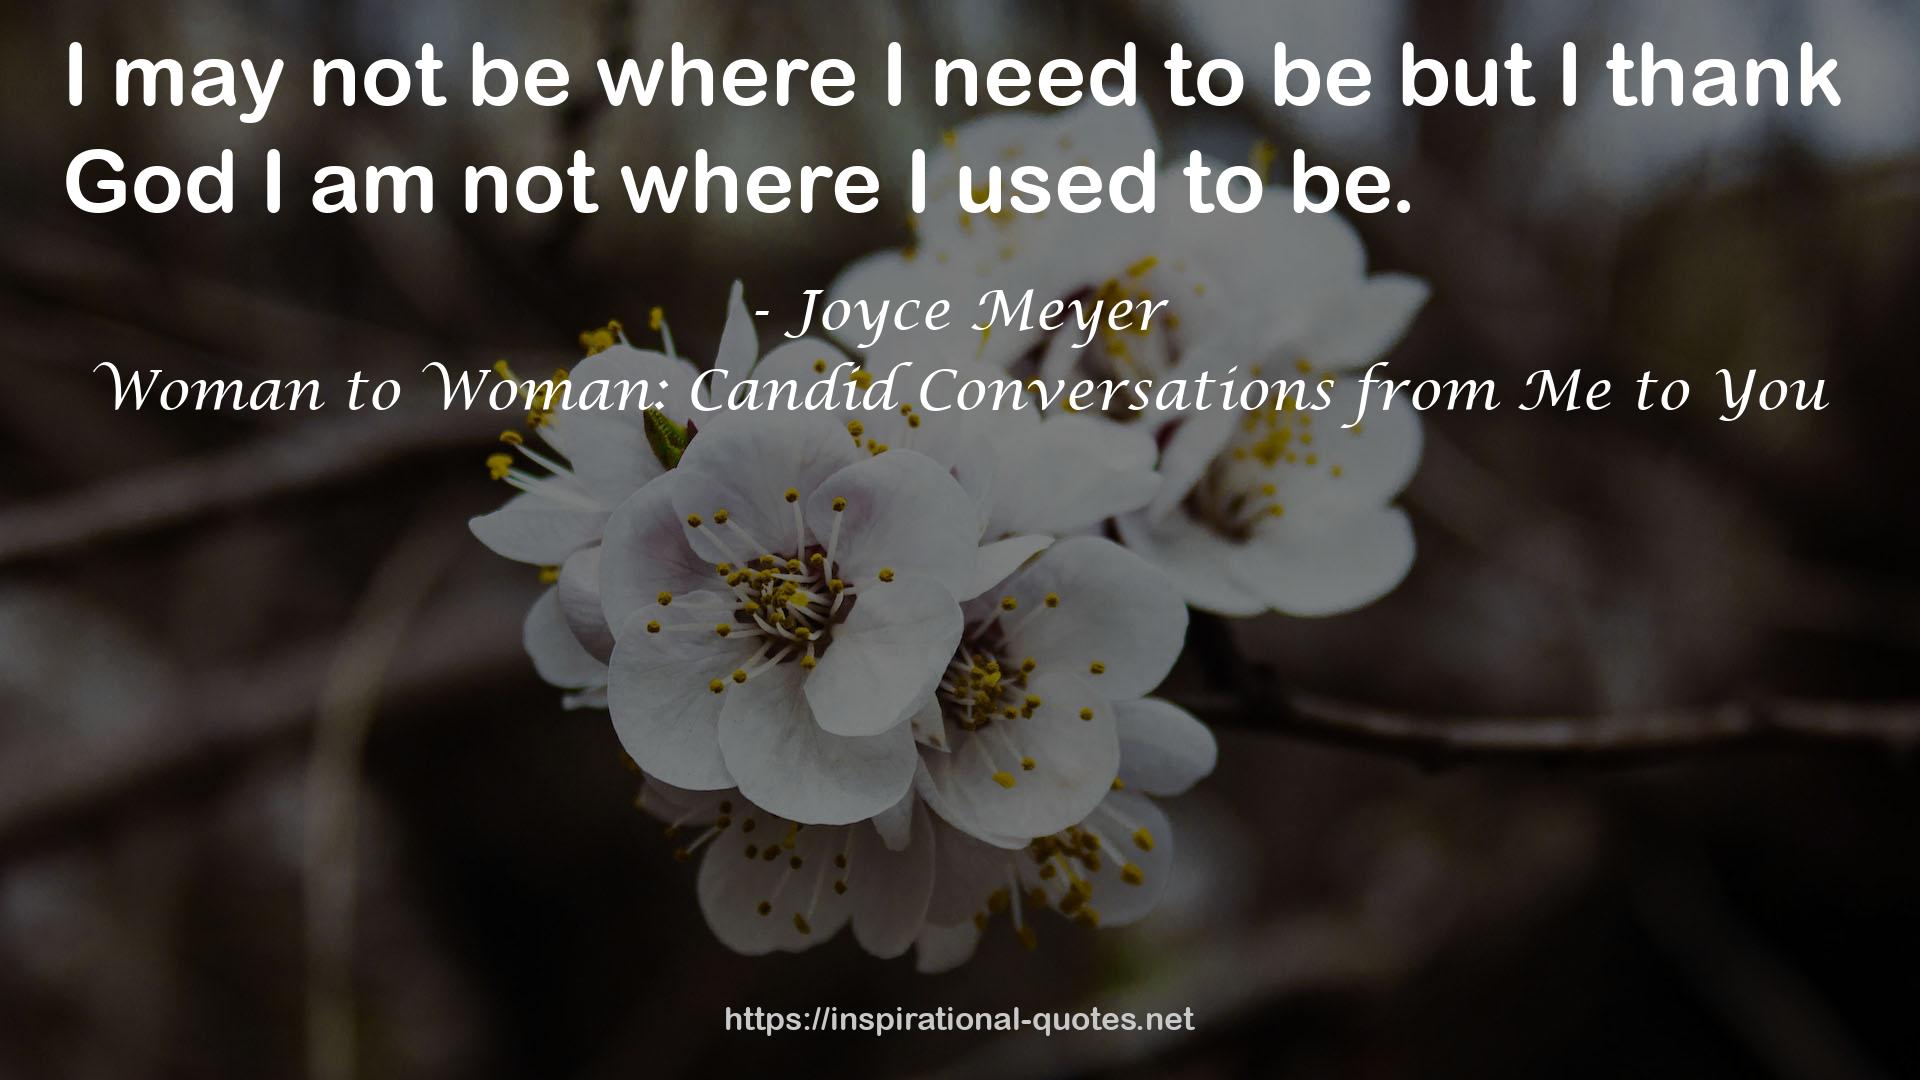 Woman to Woman: Candid Conversations from Me to You QUOTES